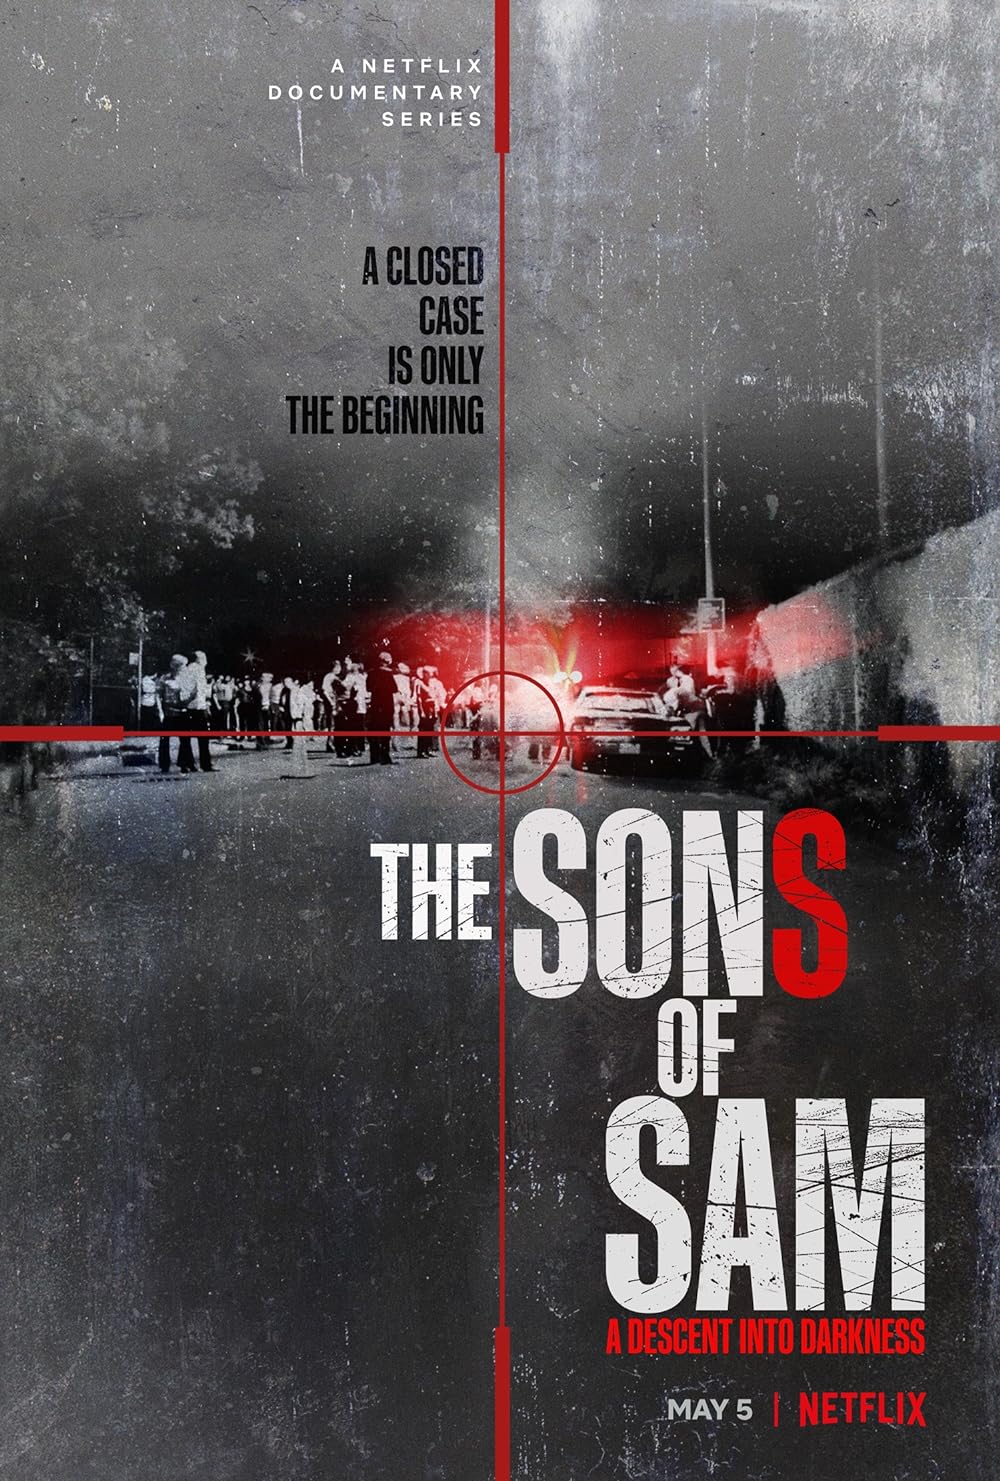 The Sons of Sam: A Descent into Darkness (2021) S1 EP3 The Ultimate Evil 448Kbps 23.976Fps 48Khz 5.1Ch DD+ NF E-AC3 Turkish Audio TAC